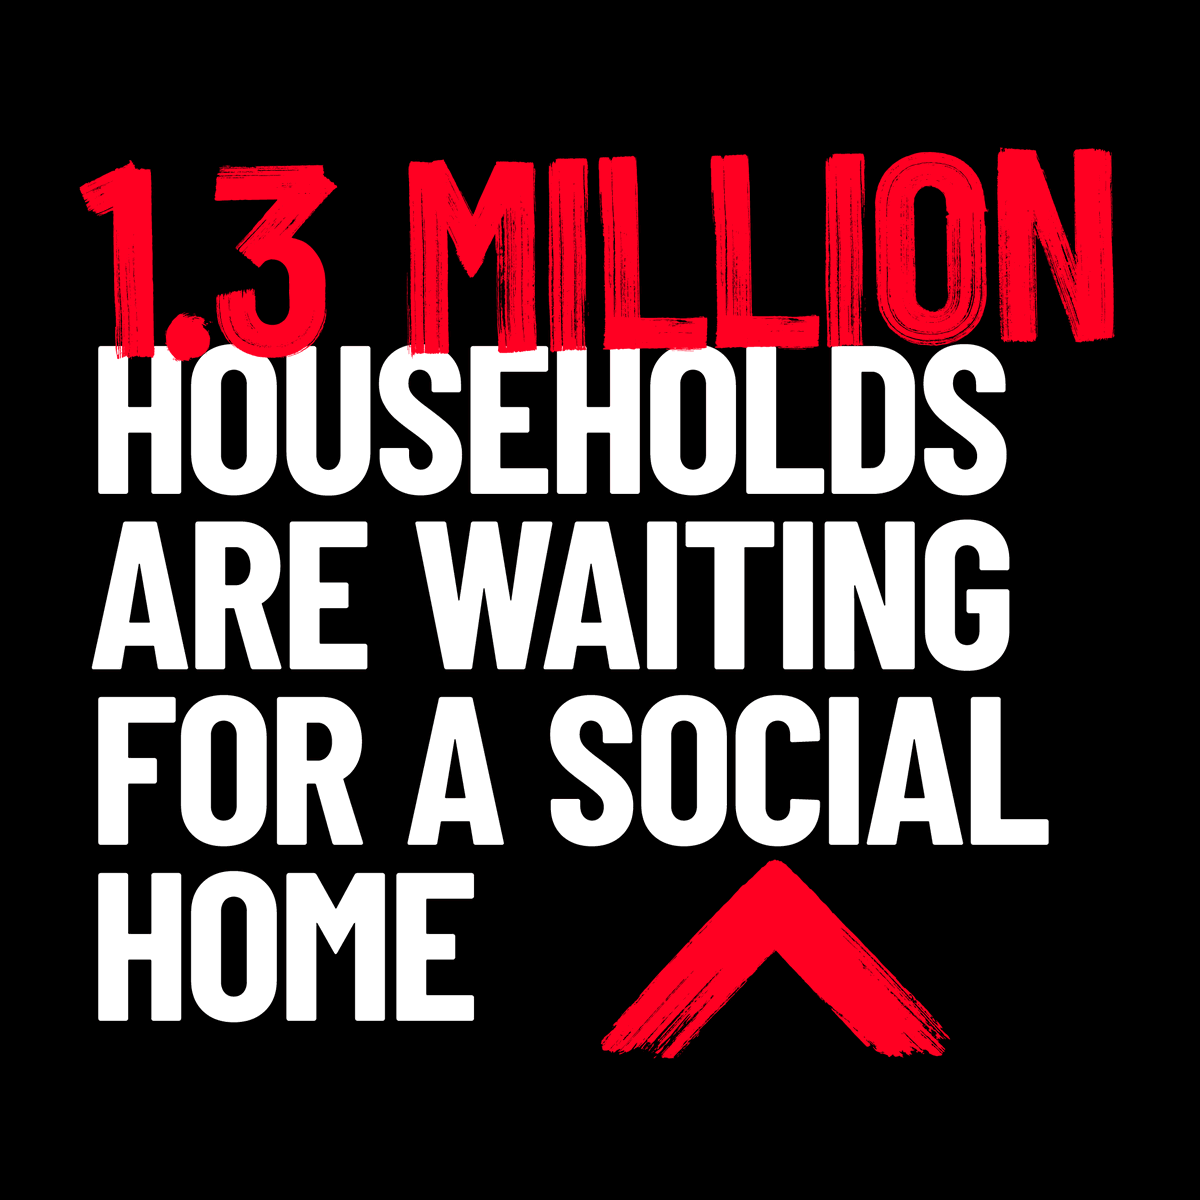 A social home isn’t just a roof over your head. It’s the foundation for a better future.

But millions are waiting for homes that aren't being built.

We need more social homes, so a new generation can say: we are #MadeInSocialHousing. Join the campaign: shltr.org.uk/Kfzfs